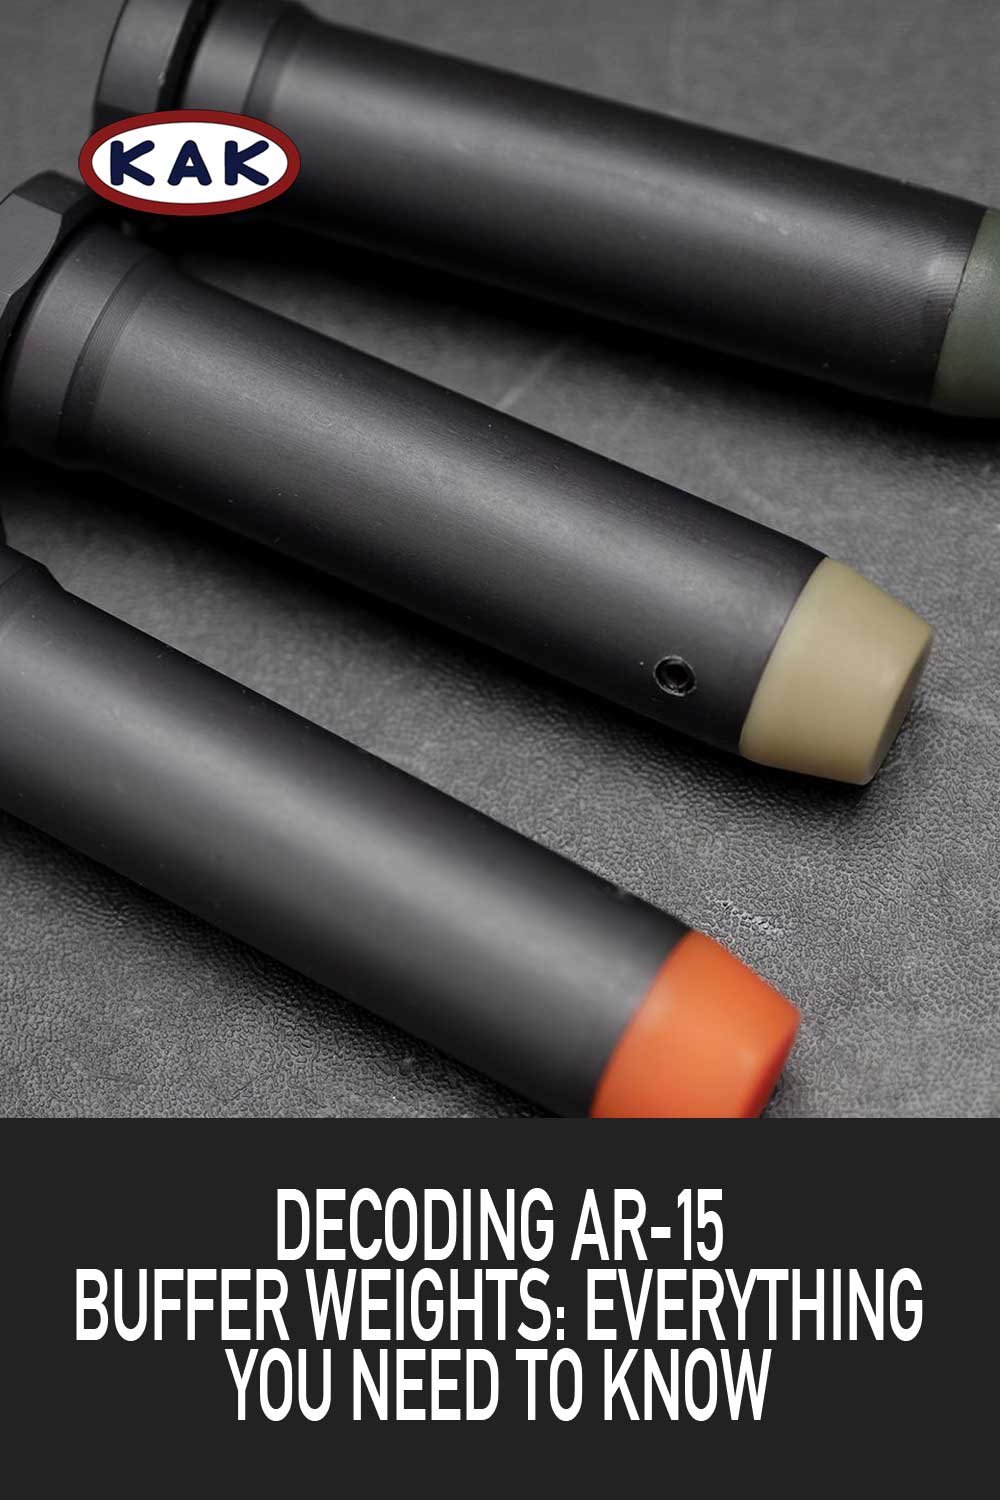 Decoding AR-15 Buffer Weights: Everything You Need to Know